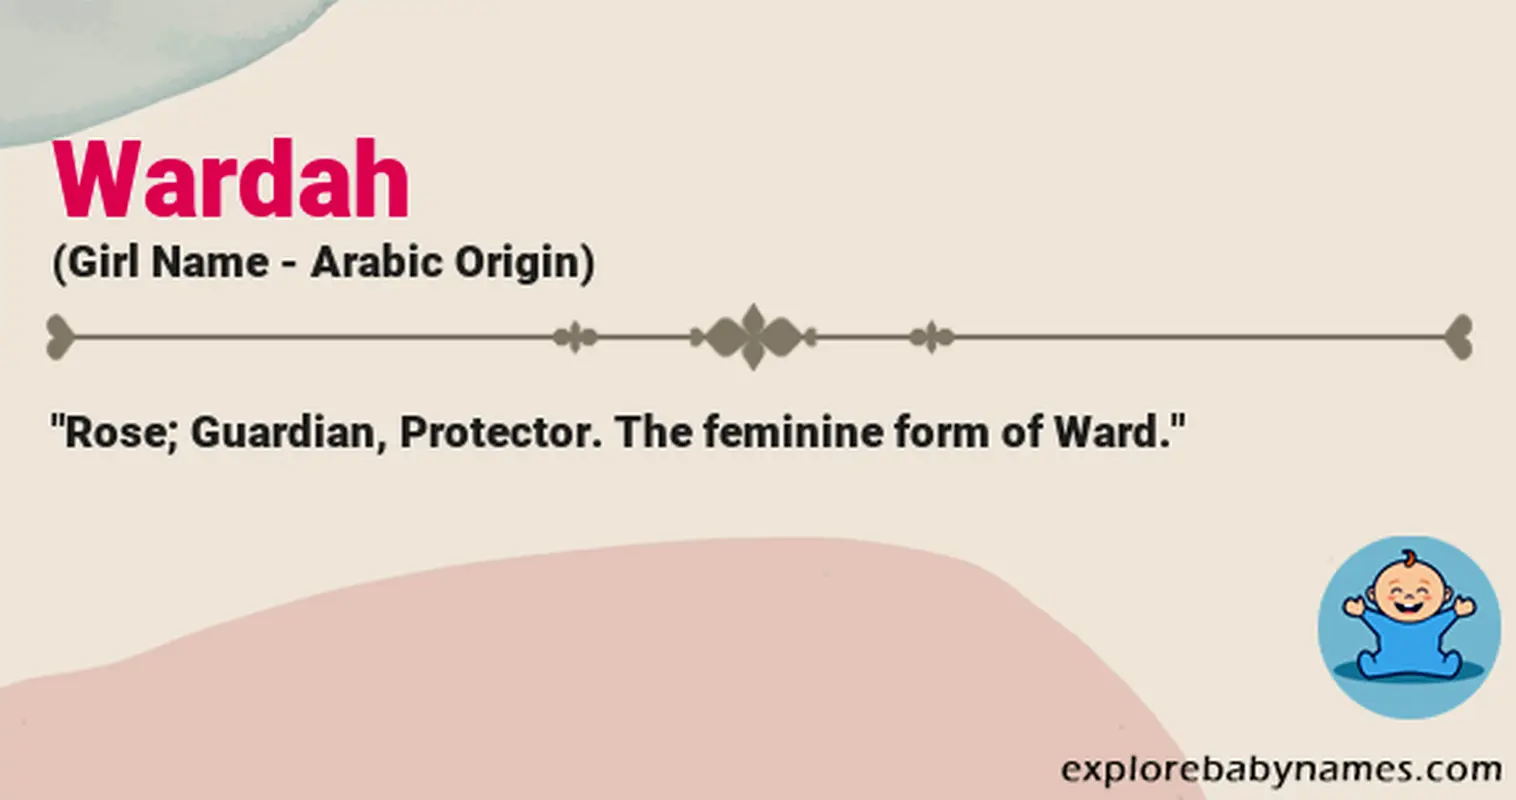 Meaning of Wardah